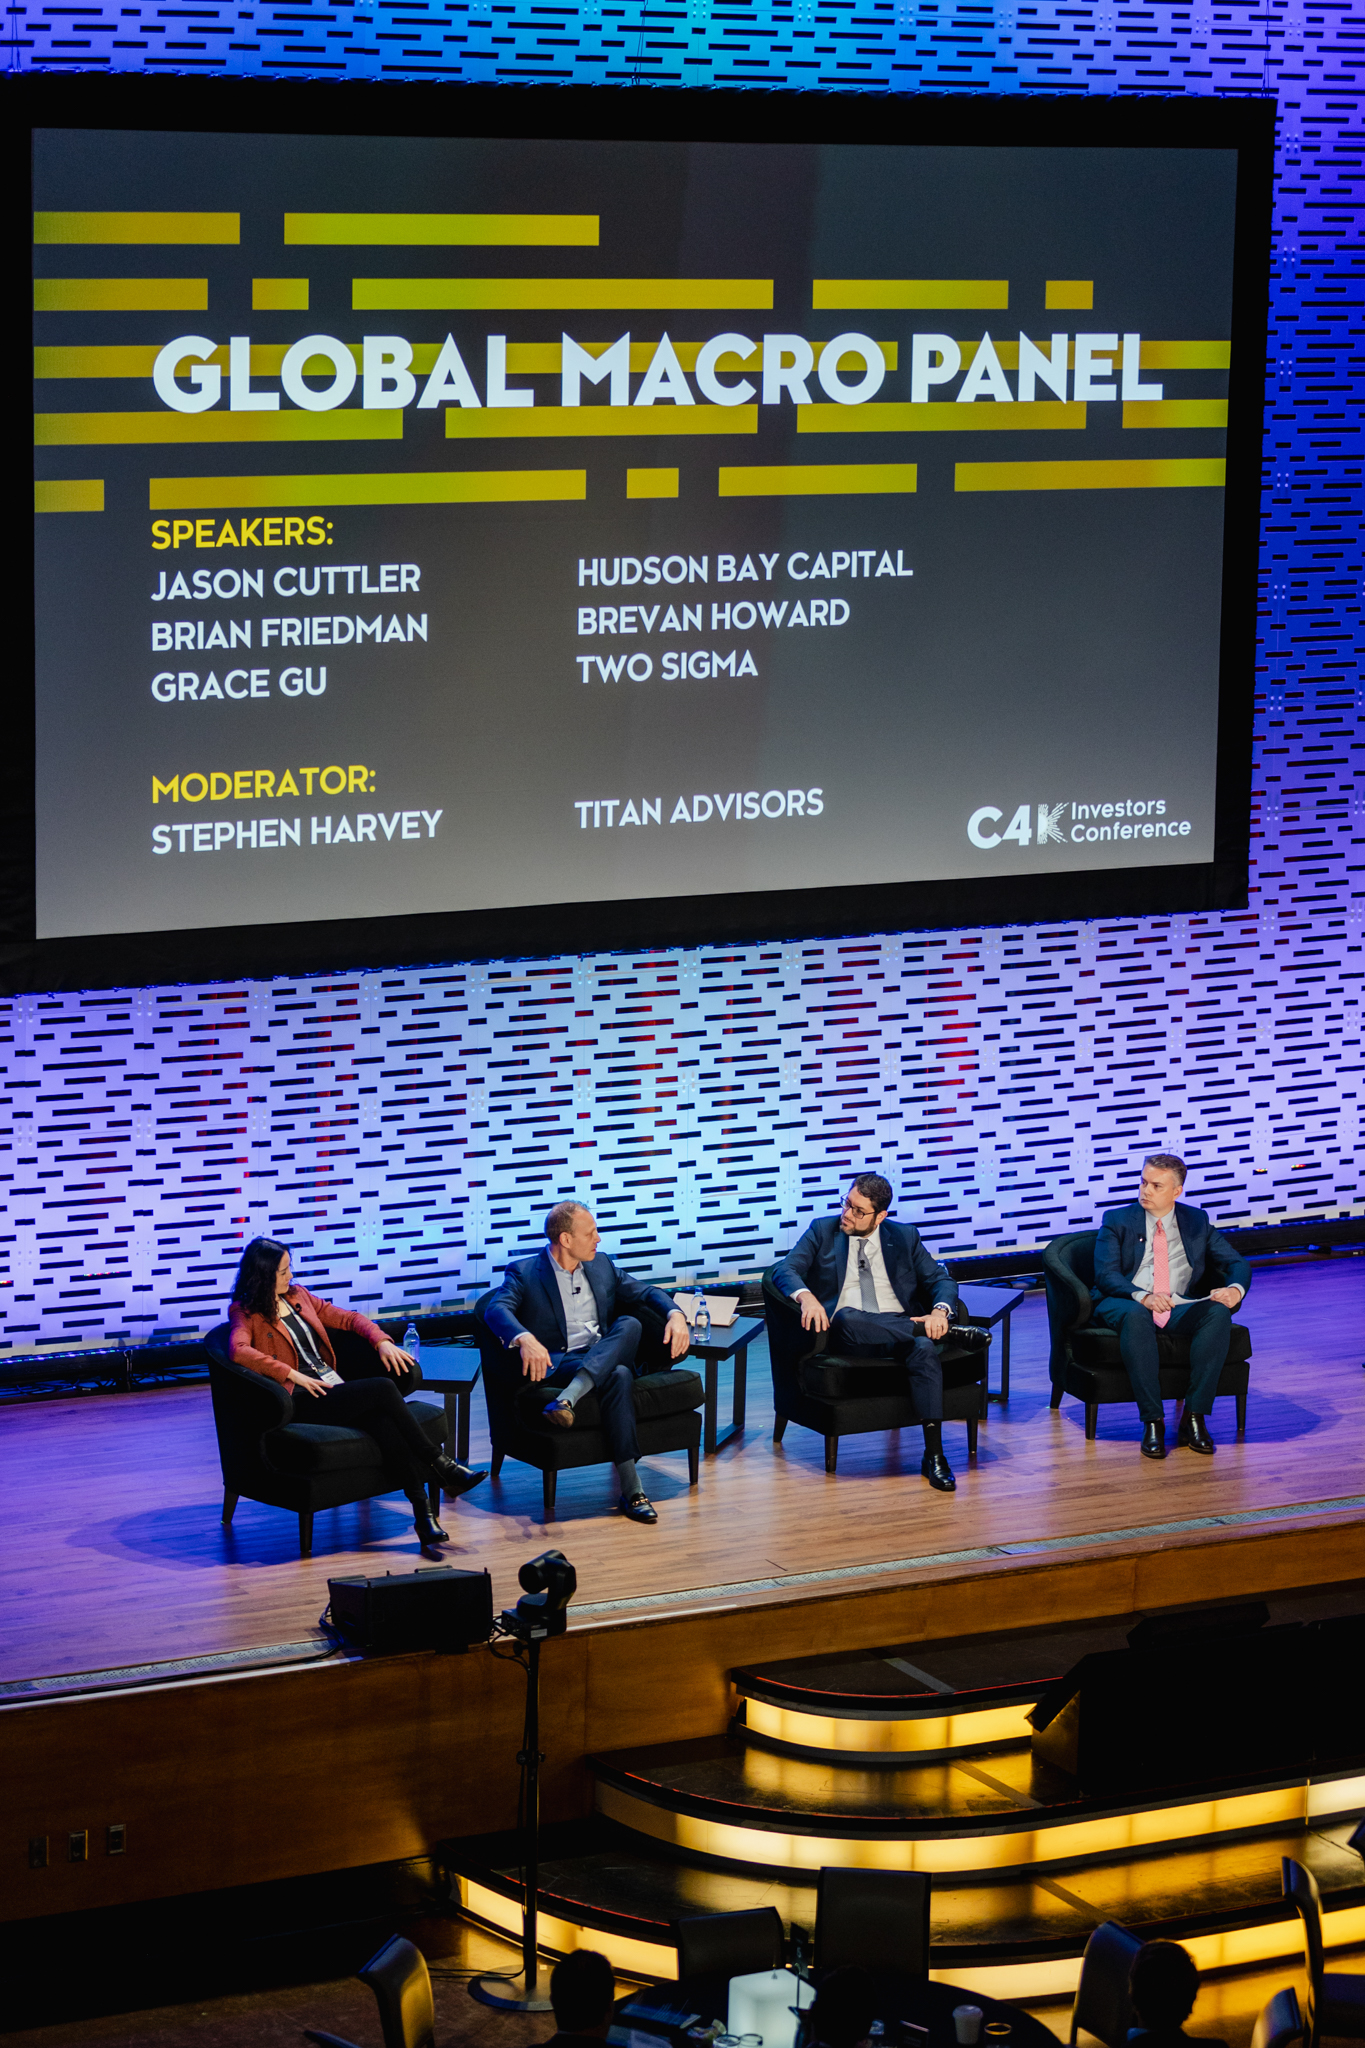 Conference speakers on stage at a global macro panel.